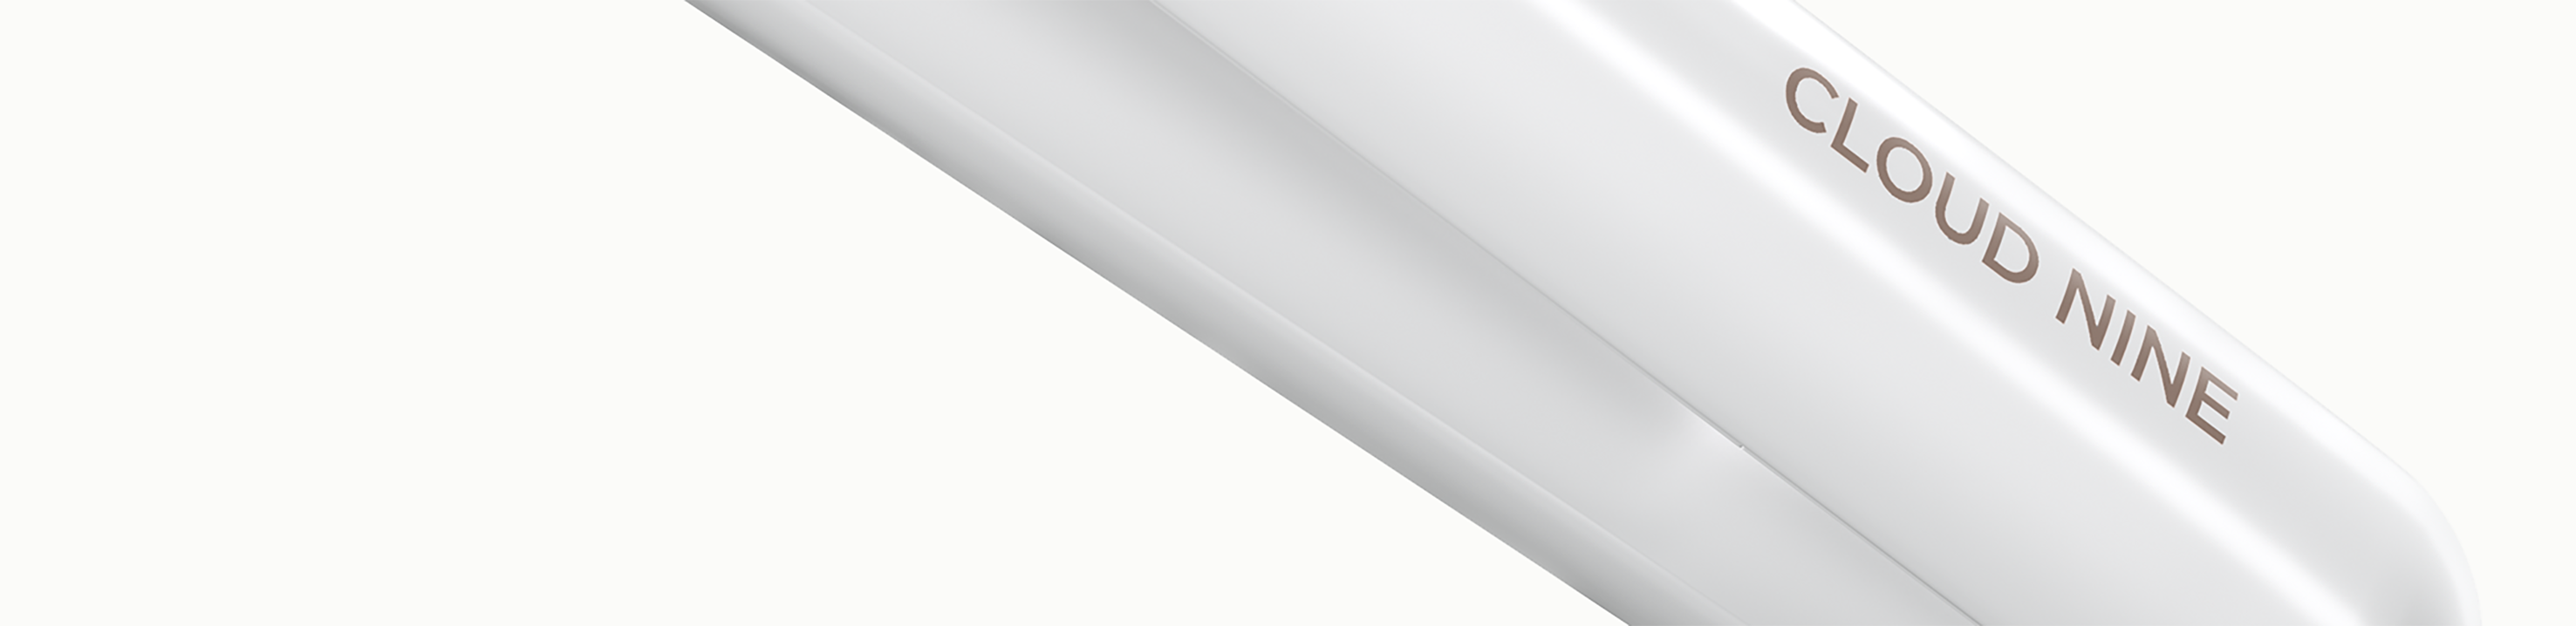 Close up of the CLOUD NINE branding on a white hair straightener on a white background.